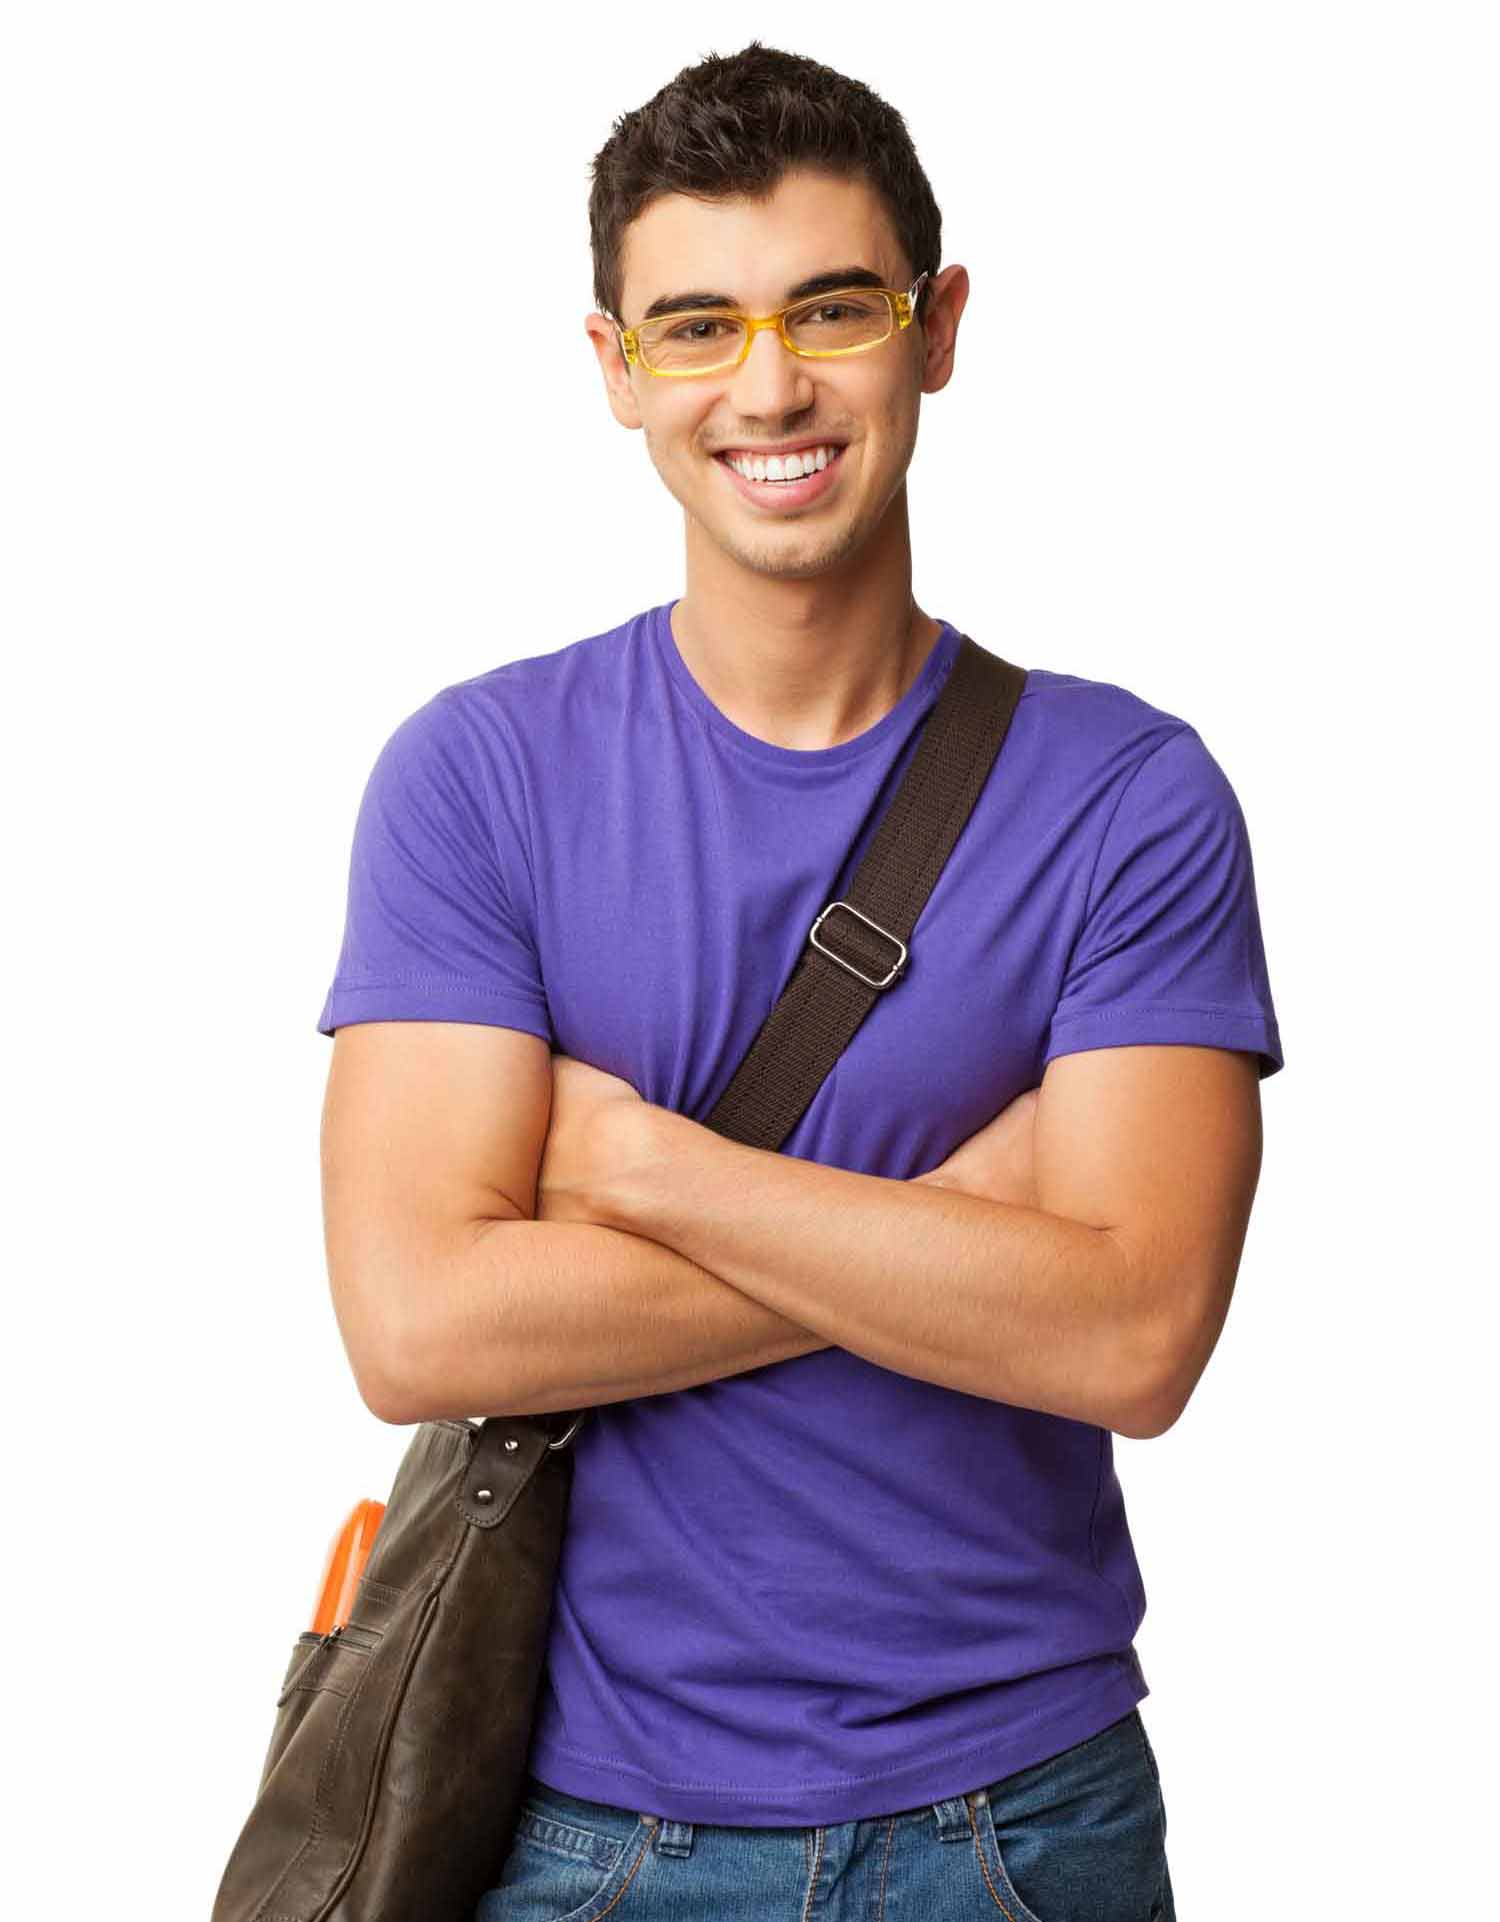 Smiling middle school aged student in a purple shirt with a brown messenger bag